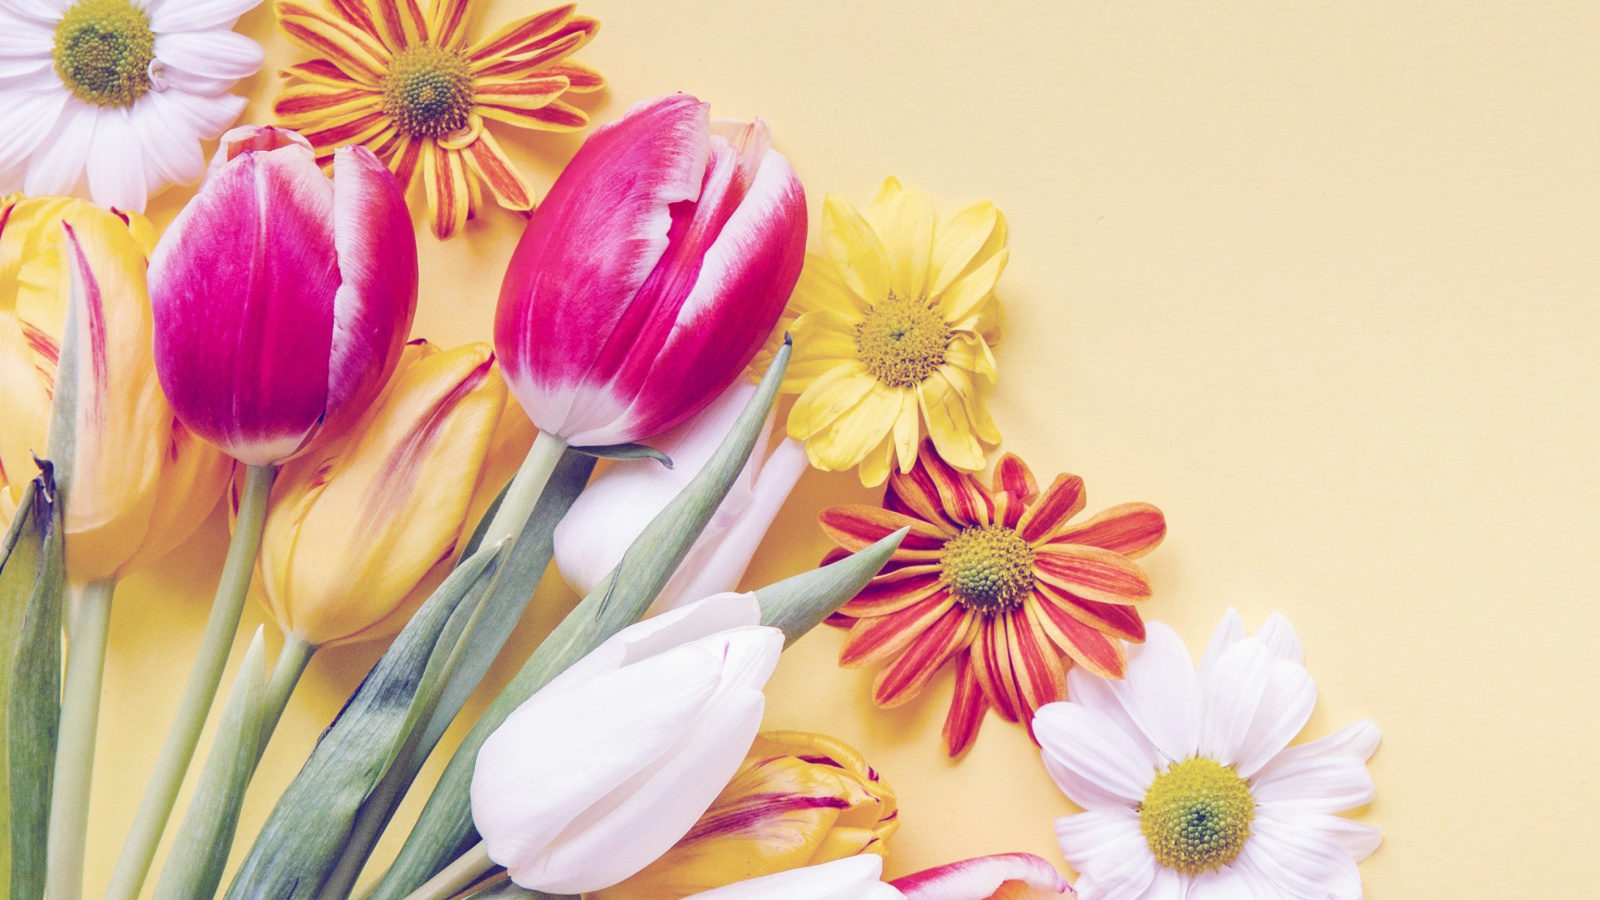 Spring tulips on yellow background wallpaper 1600x900